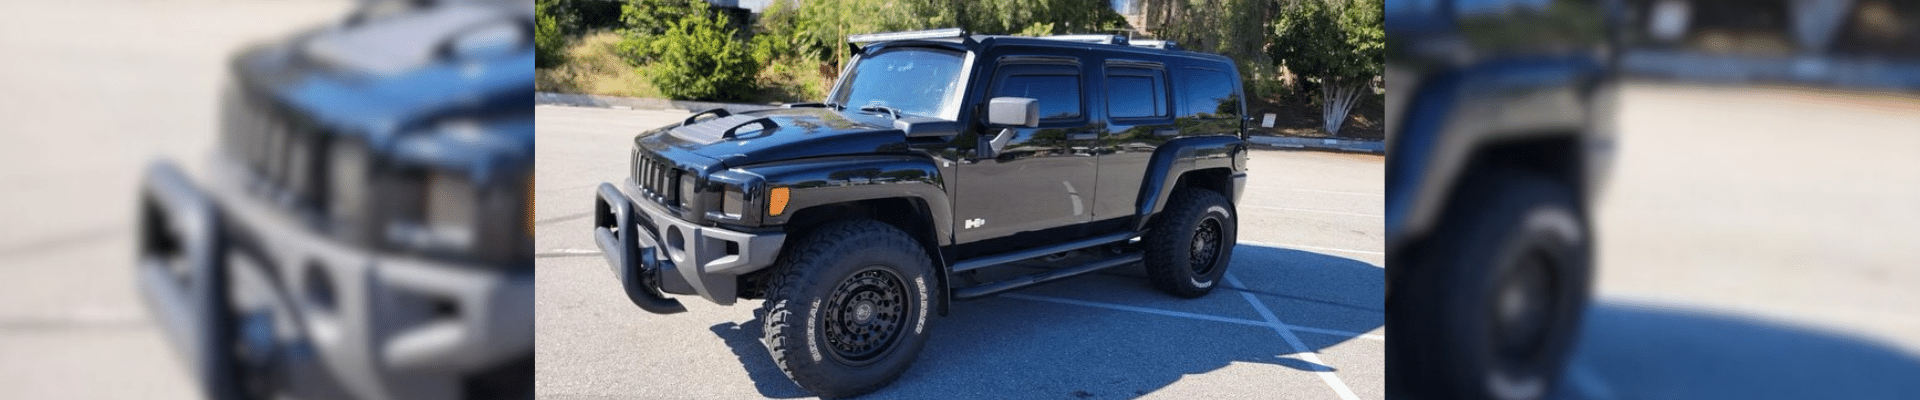 Hummer H3 gallery